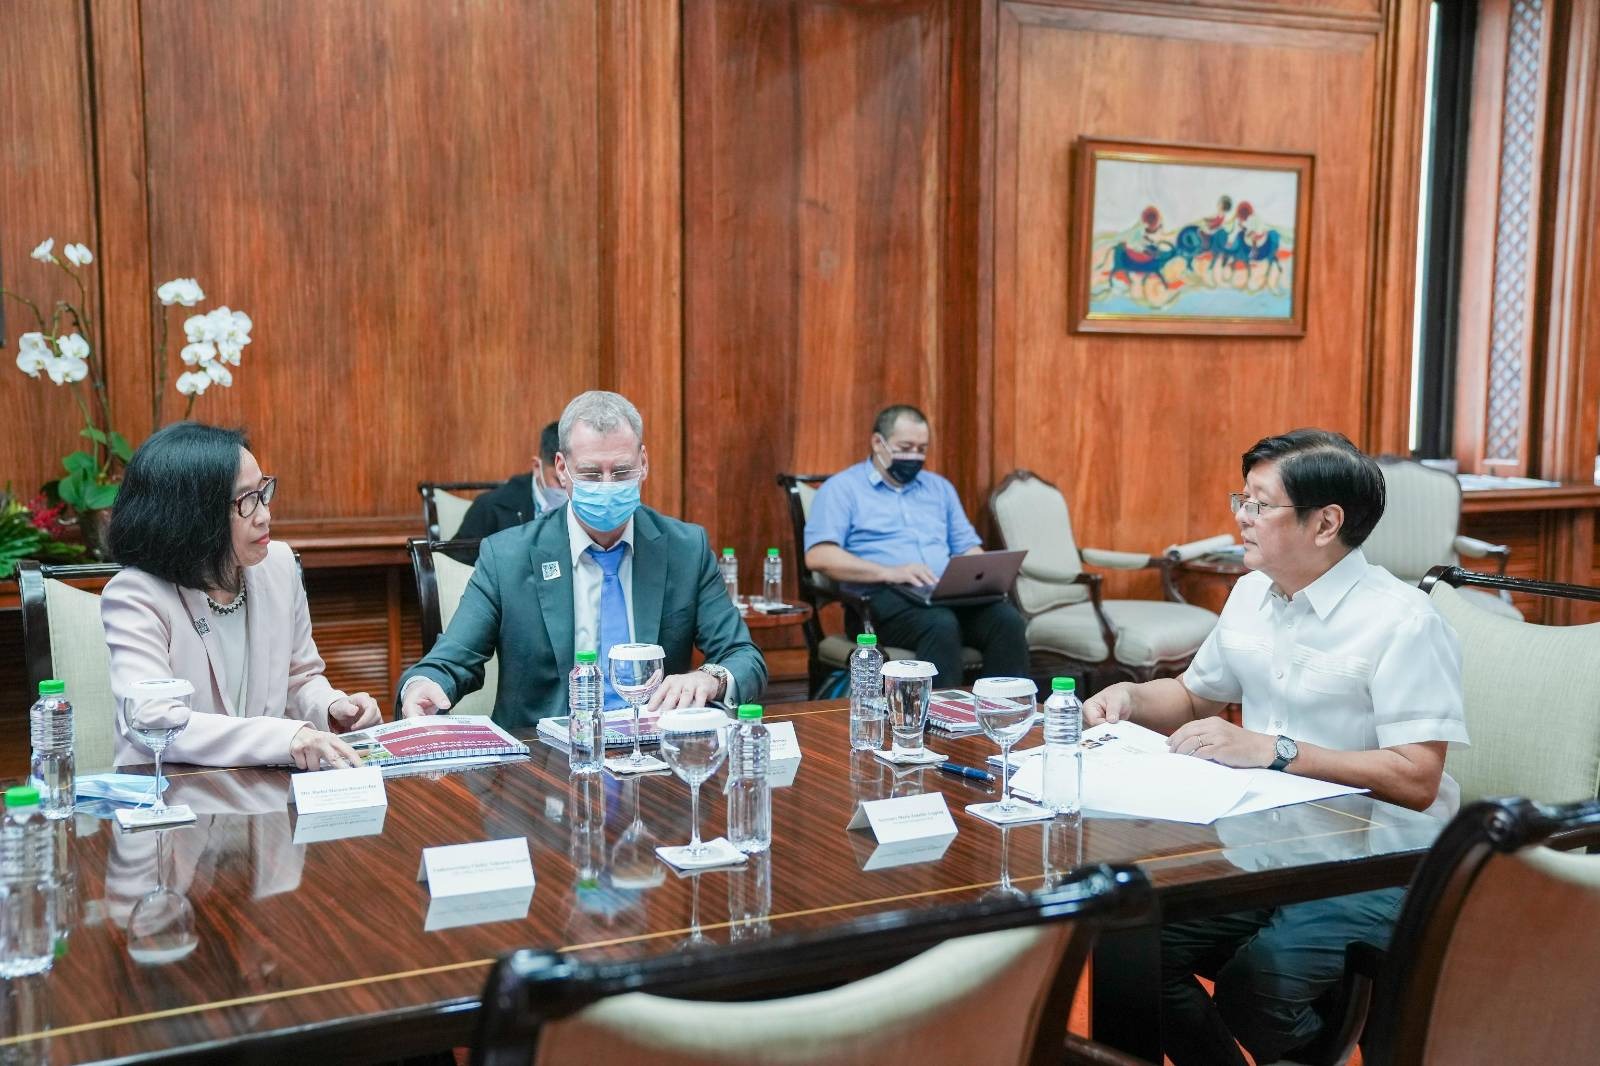 President Ferdinand R. Marcos Jr. meets with officials of Chen Yi Agventures